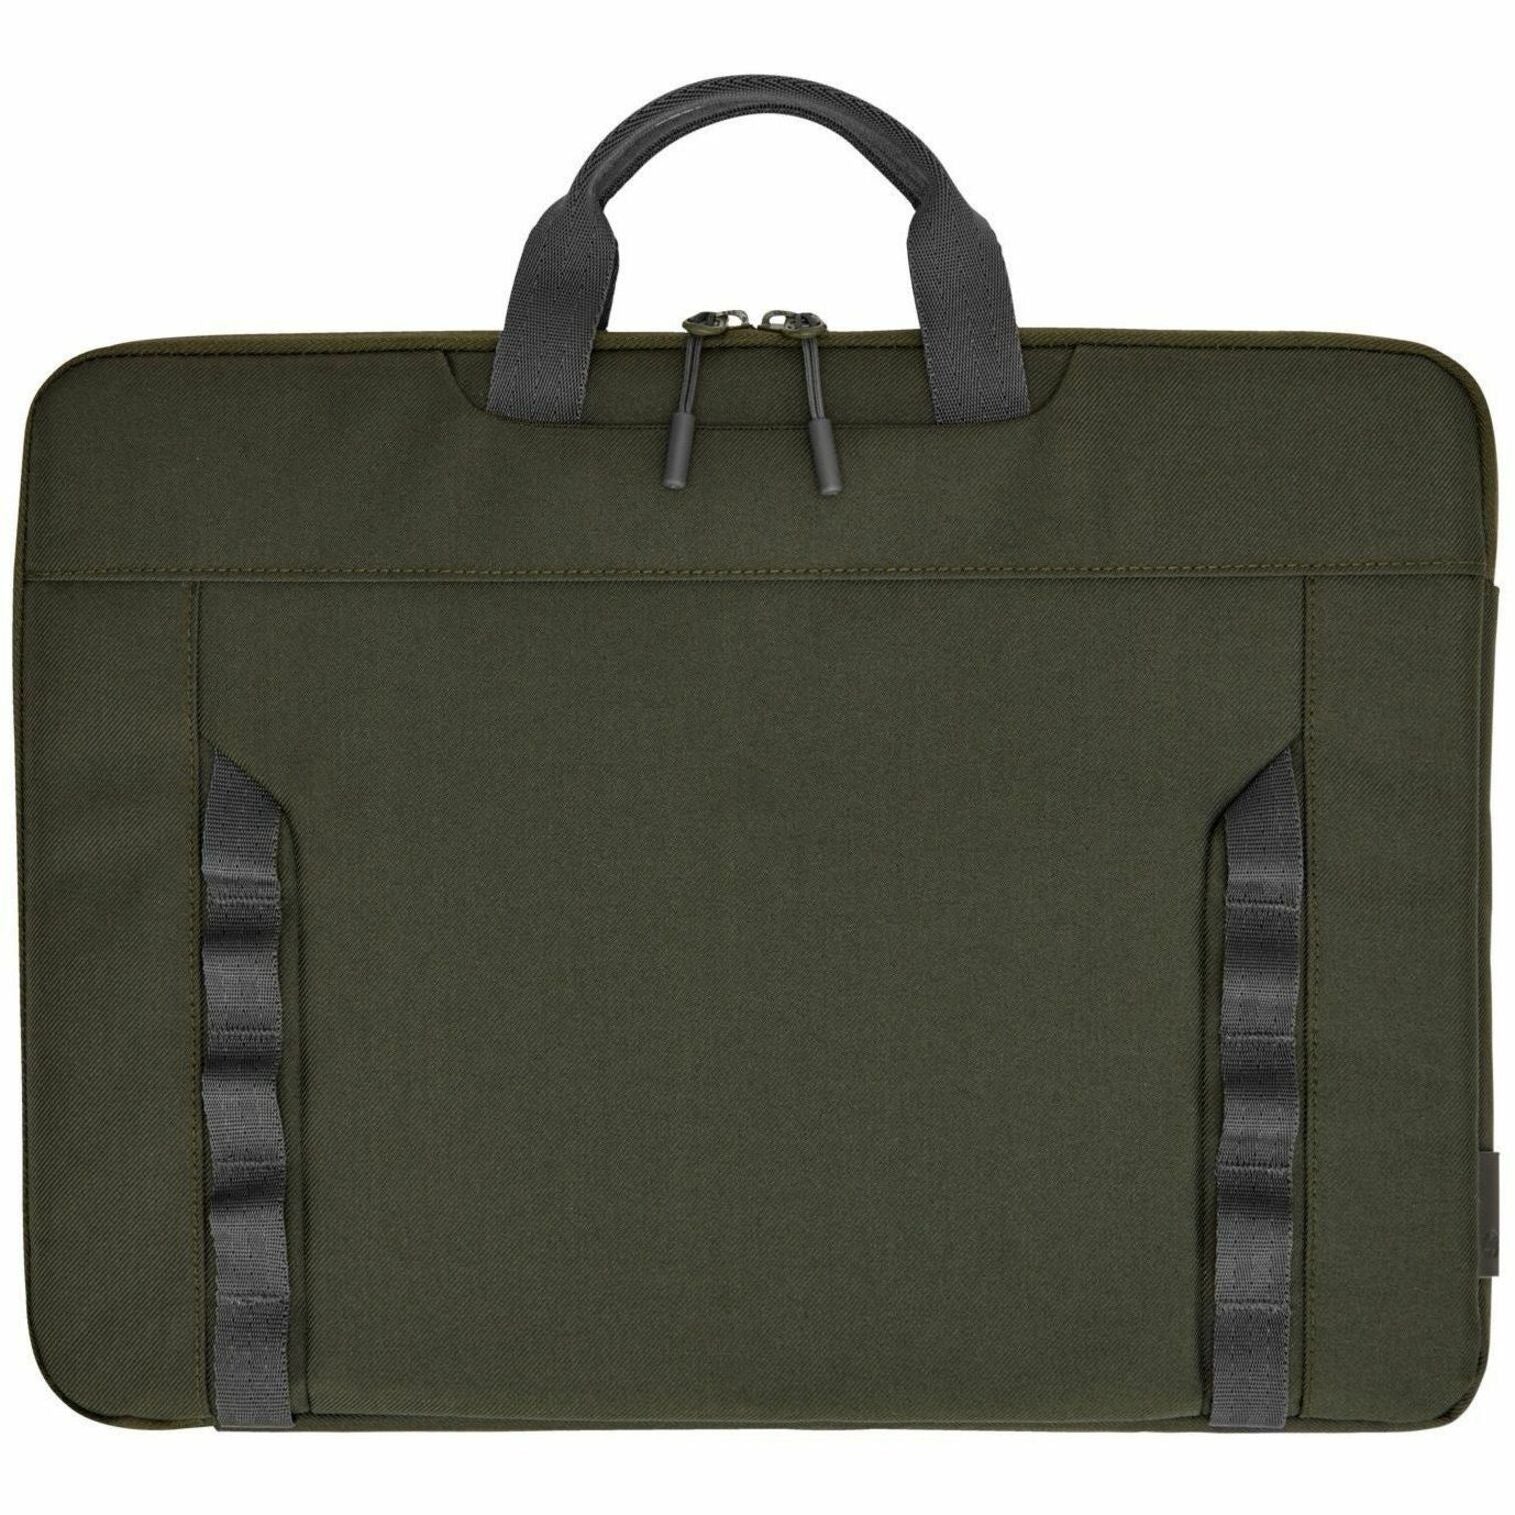 HP Carrying Case (Sleeve) for 15.6" Notebook - Gray, Green (9J498AA)